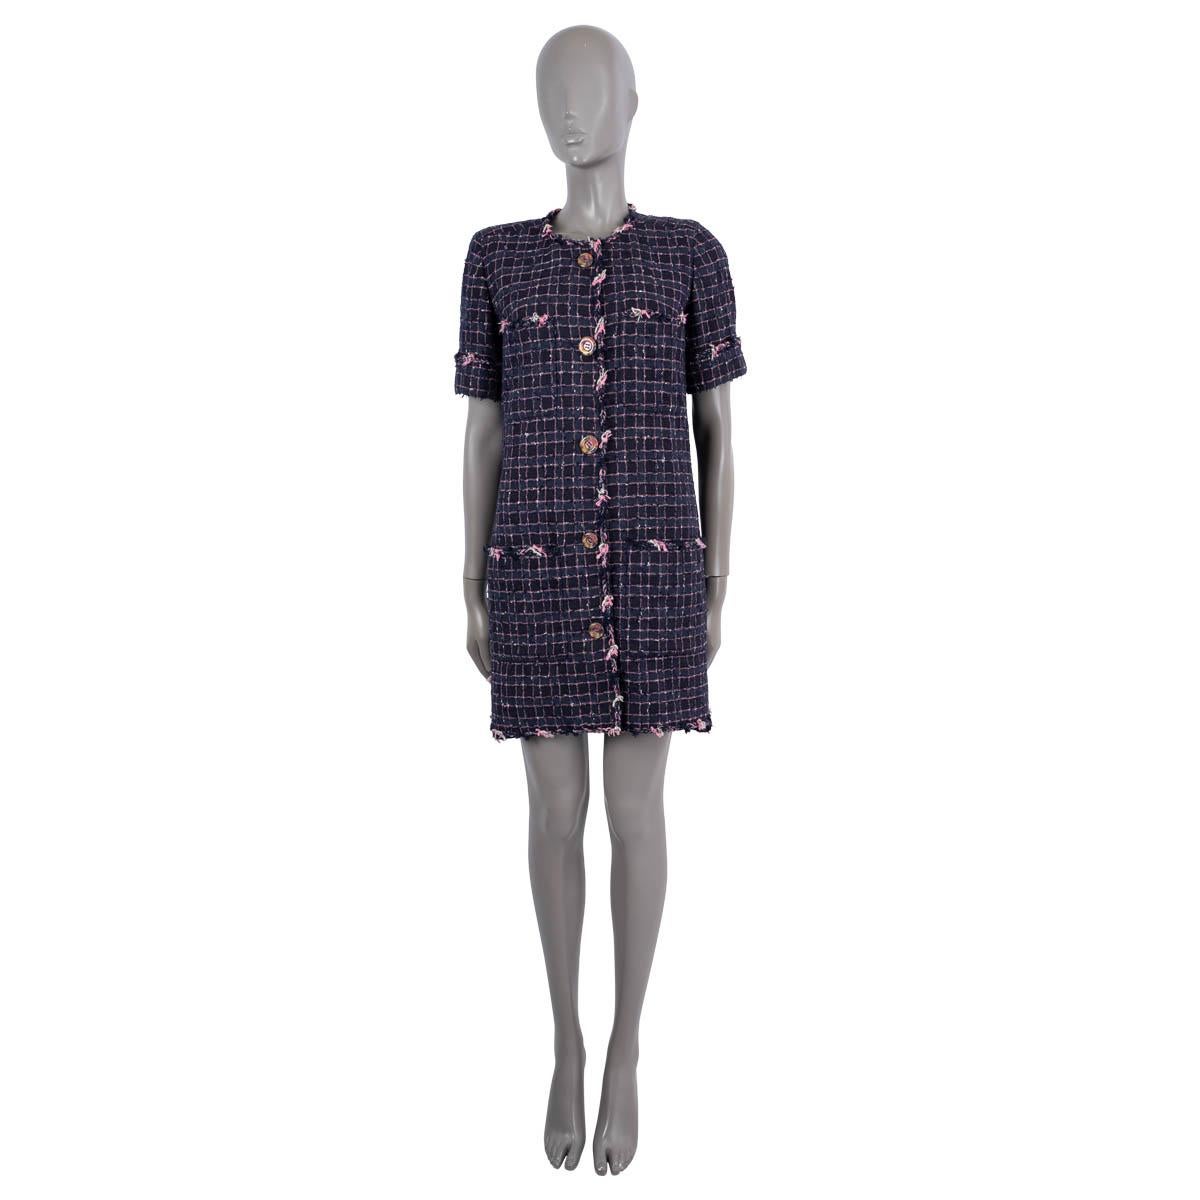 100% authentic Chanel short sleeve check tweed coat in navy blue and pink polyester (29%), acrylic (28%), cotton (19%), rayon (12%), ramie (7%) and nylon (5%). The design features a round neck, two side slits, belted back, five colorful front